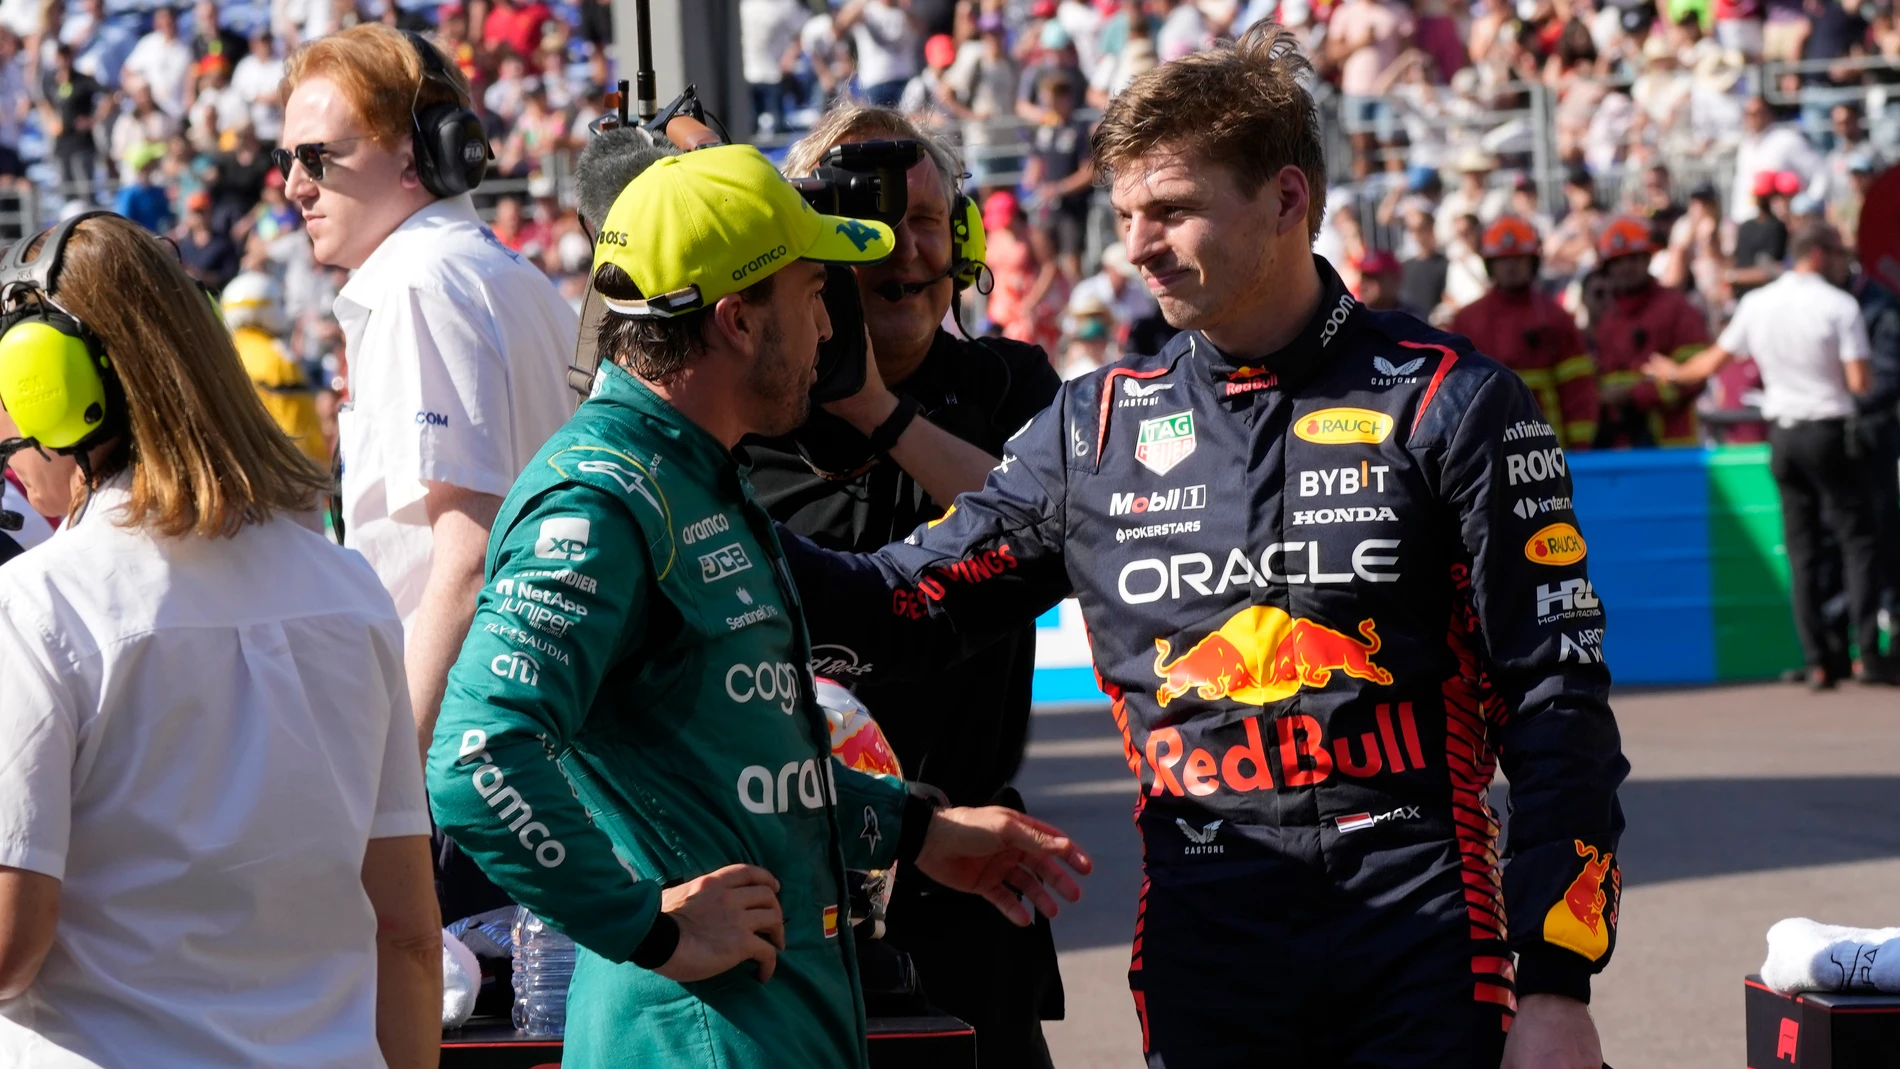 Aston Martin driver Fernando Alonso of Spain, left, speaks with Red Bull driver Max Verstappen of the Netherlands in the pit area at the end of the Formula One qualifying session at the Monaco racetrack, in Monaco, Saturday, May 27, 2023. The Formula One race will be held on Sunday with Verstappen taking pole position. (AP Photo/Luca Bruno)